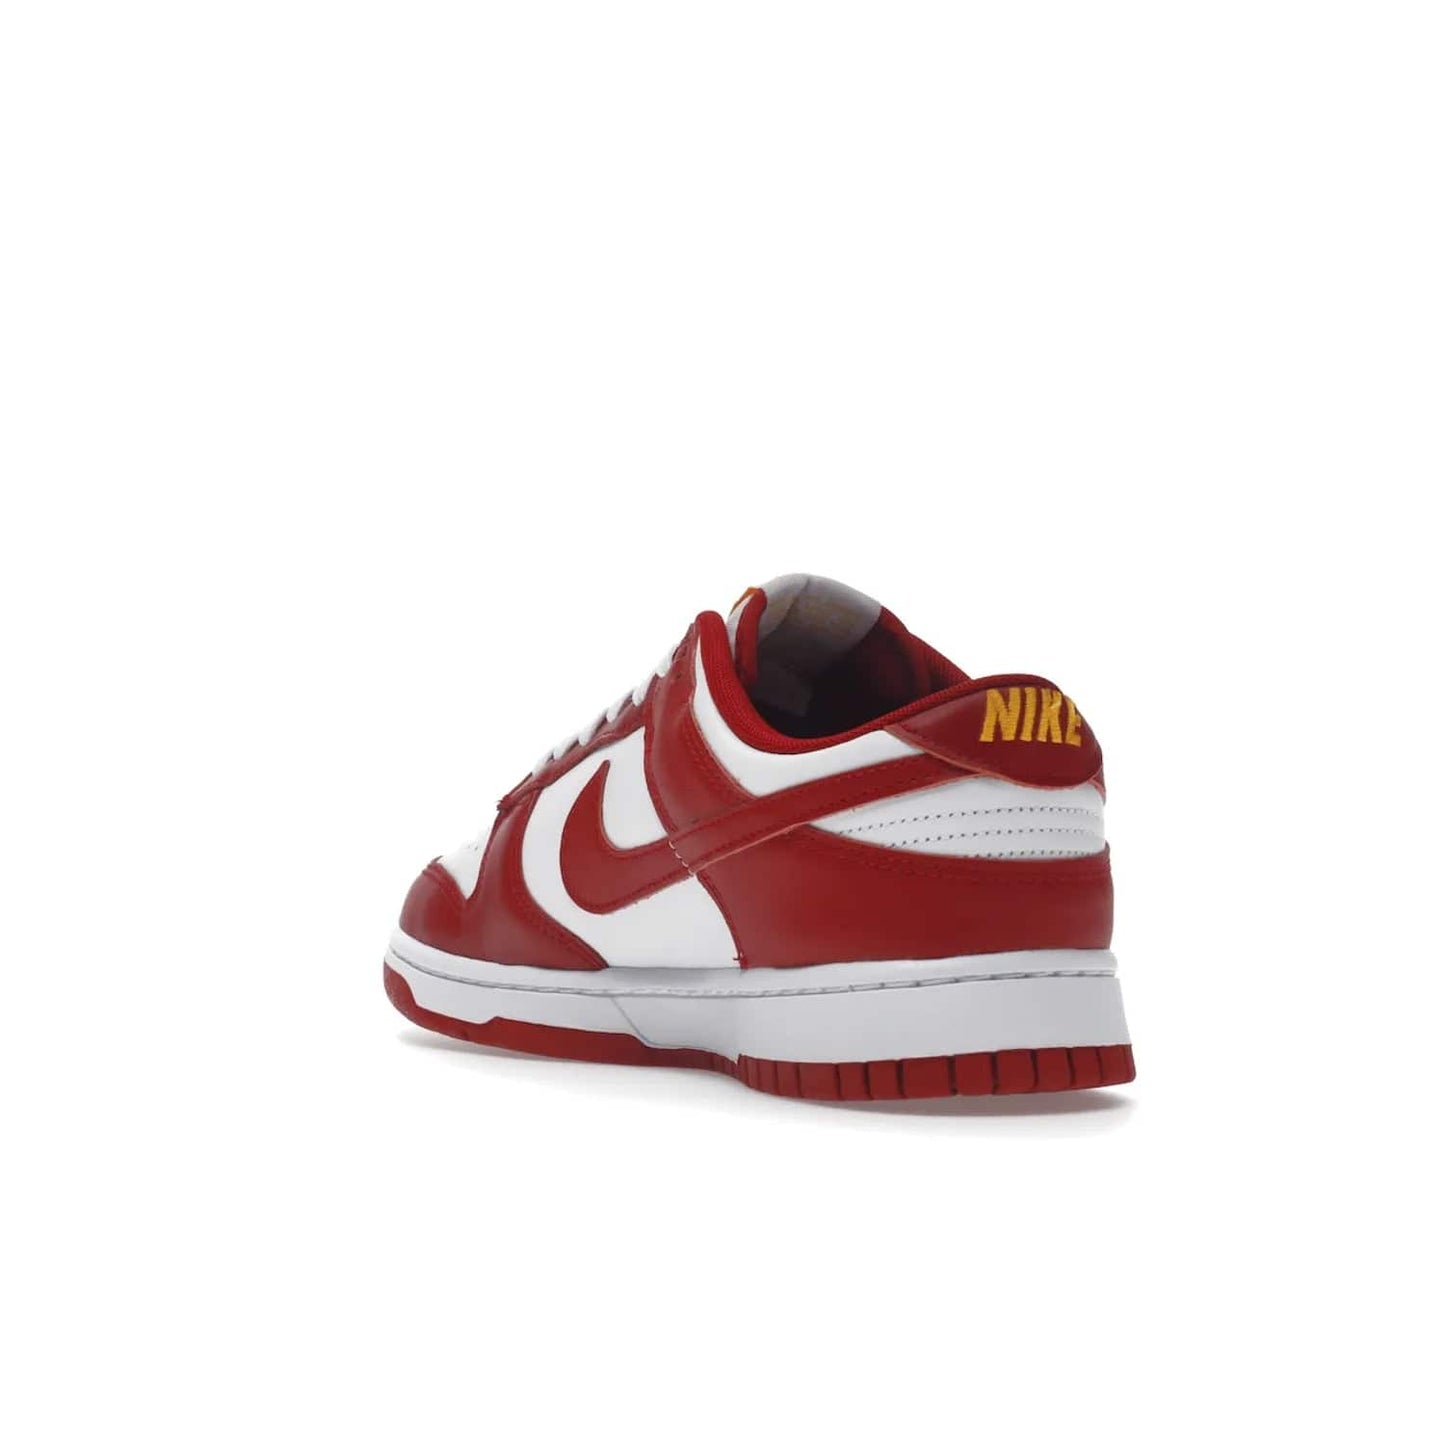 Nike Dunk Low USC - Image 25 - Only at www.BallersClubKickz.com - The Nike Dunk Low USC DD1391-602 colorway captures the eye of University of Southern California fans. Crafted with leather and rubber upper and outsole, this stylish sneaker features a white, gym red, and yellow colorway. With yellow Nike branding, white perforated vamp, and red suede Swoosh, this sneaker turns heads. Get the classic Nike Dunk Low USC releasing on November 9th, 2022.